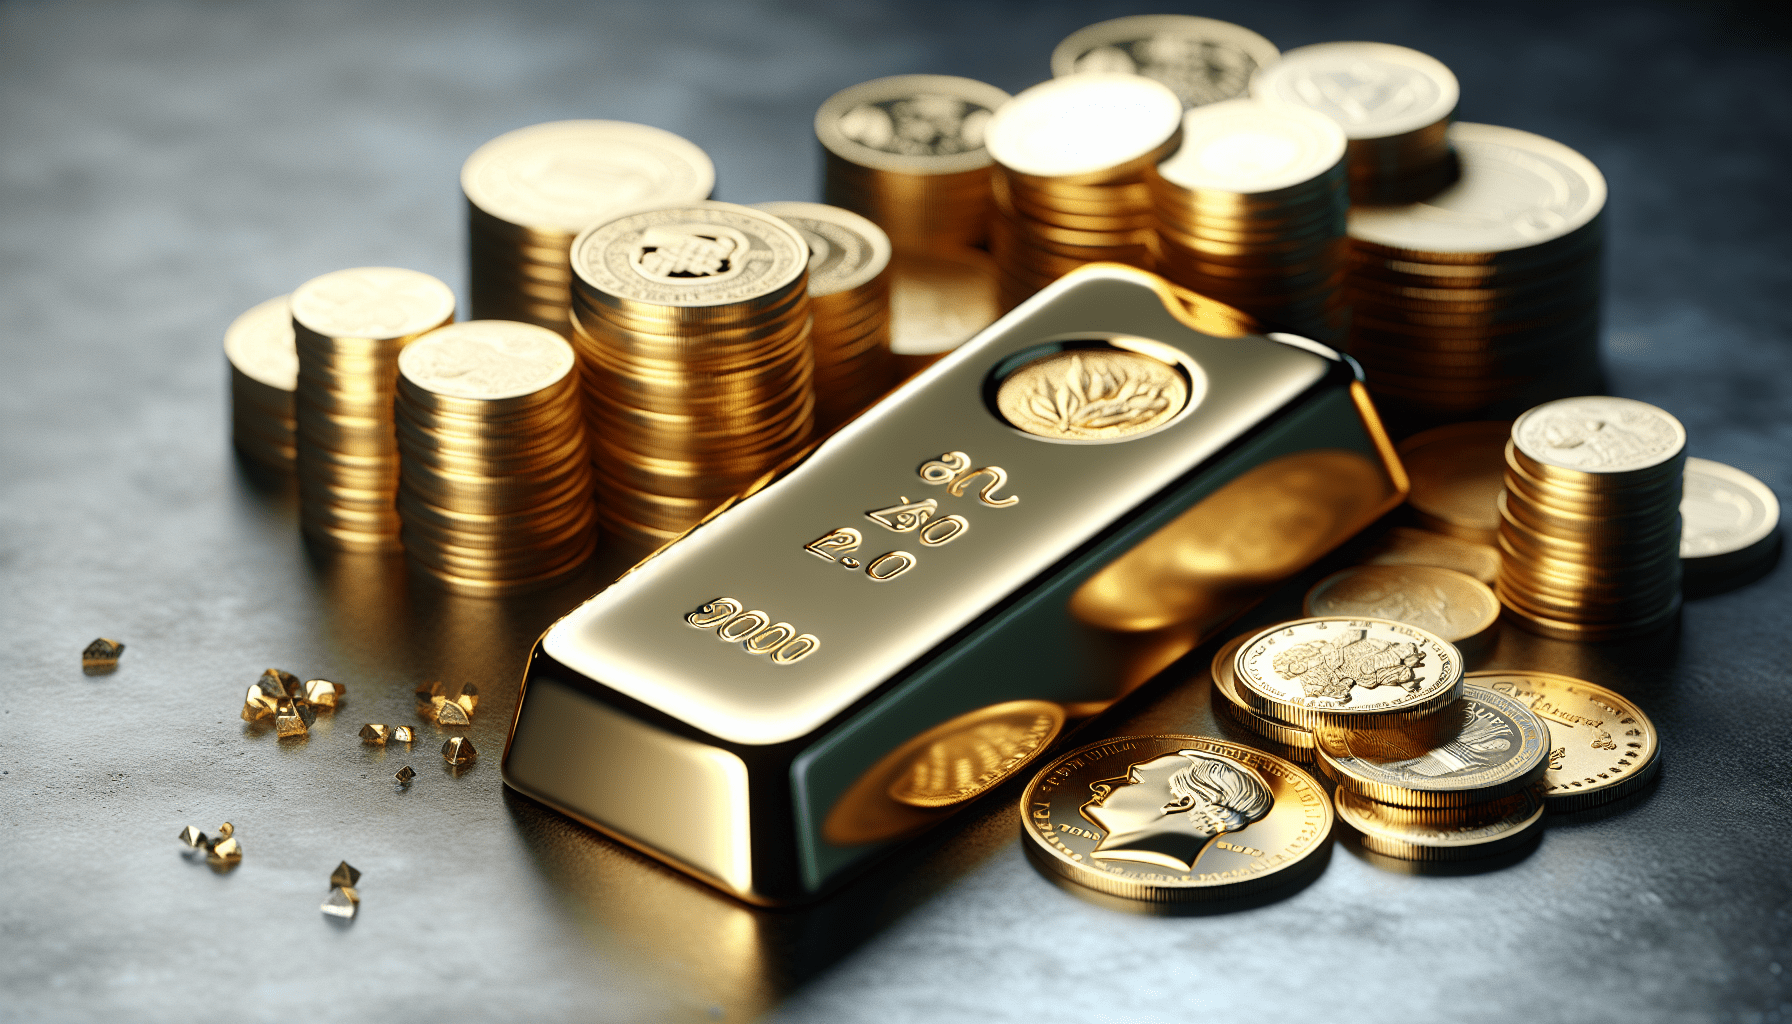 What Types Of Gold Products Can I Invest In Through Malaysian Banks?